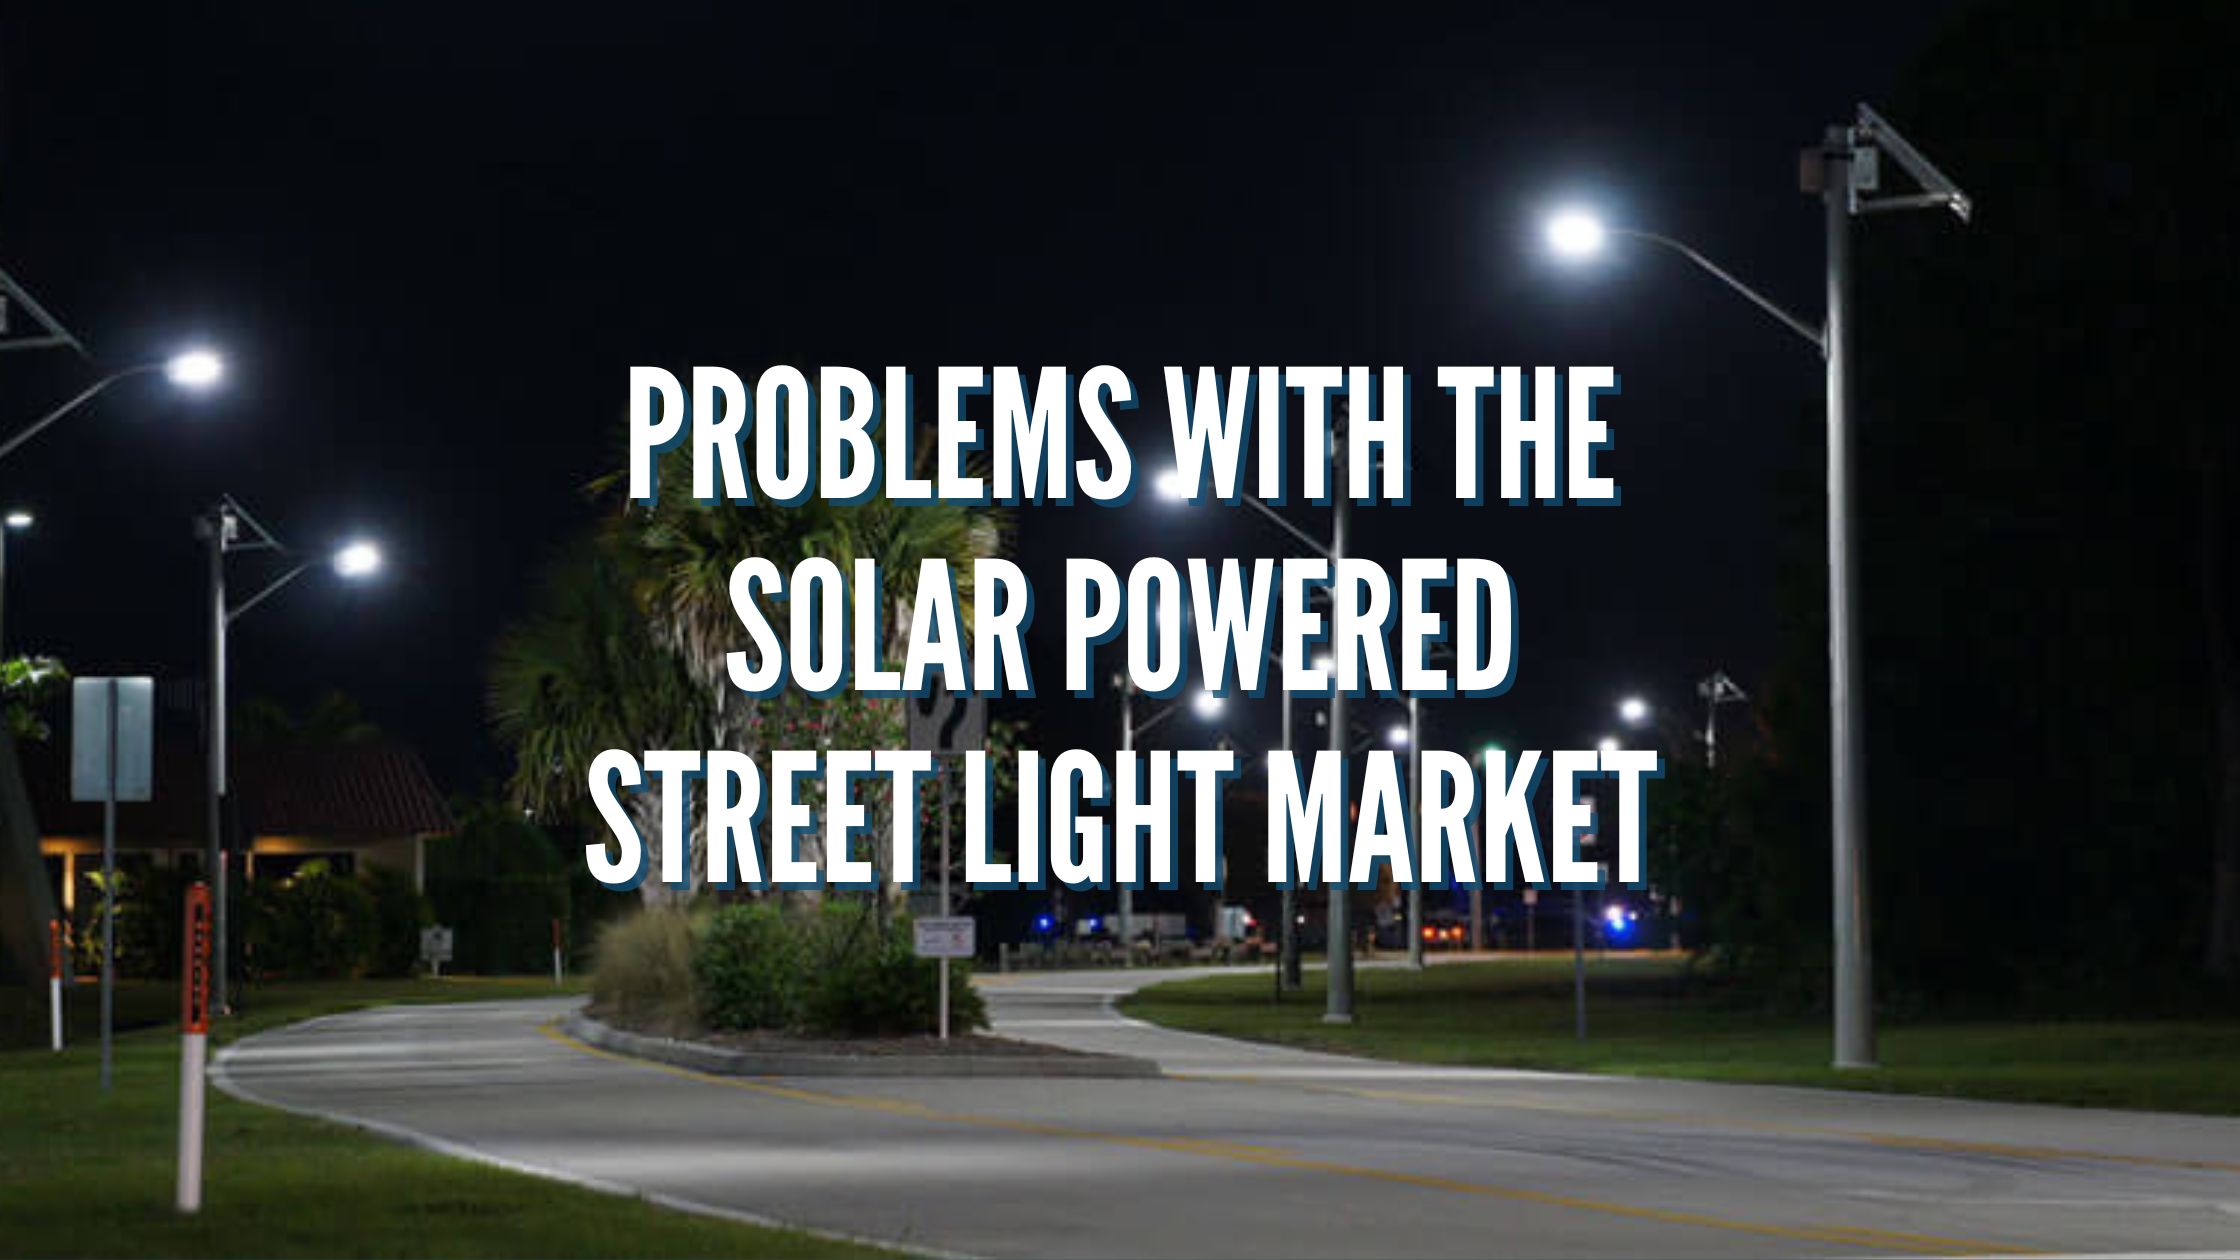 Problems With the Solar Powered Street Light Market